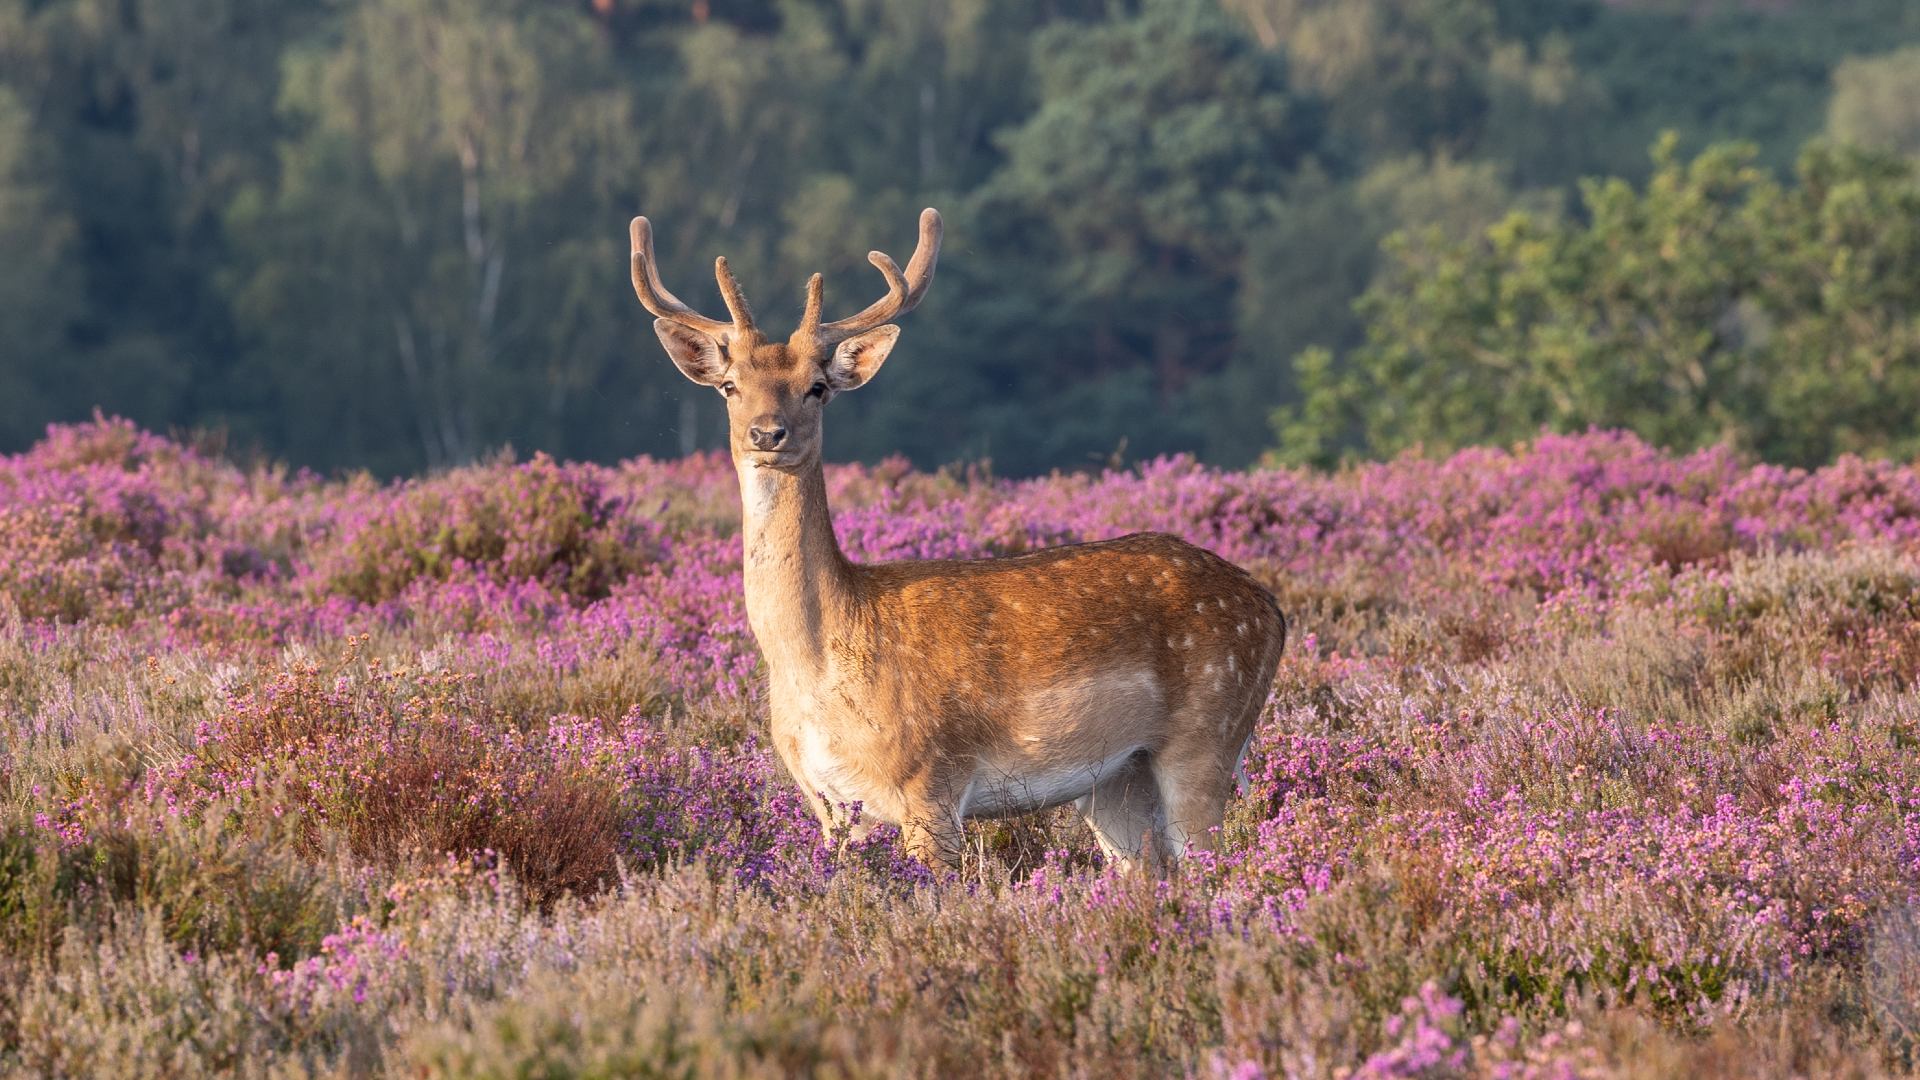 A solo deer standing in purple heather in Hampshire